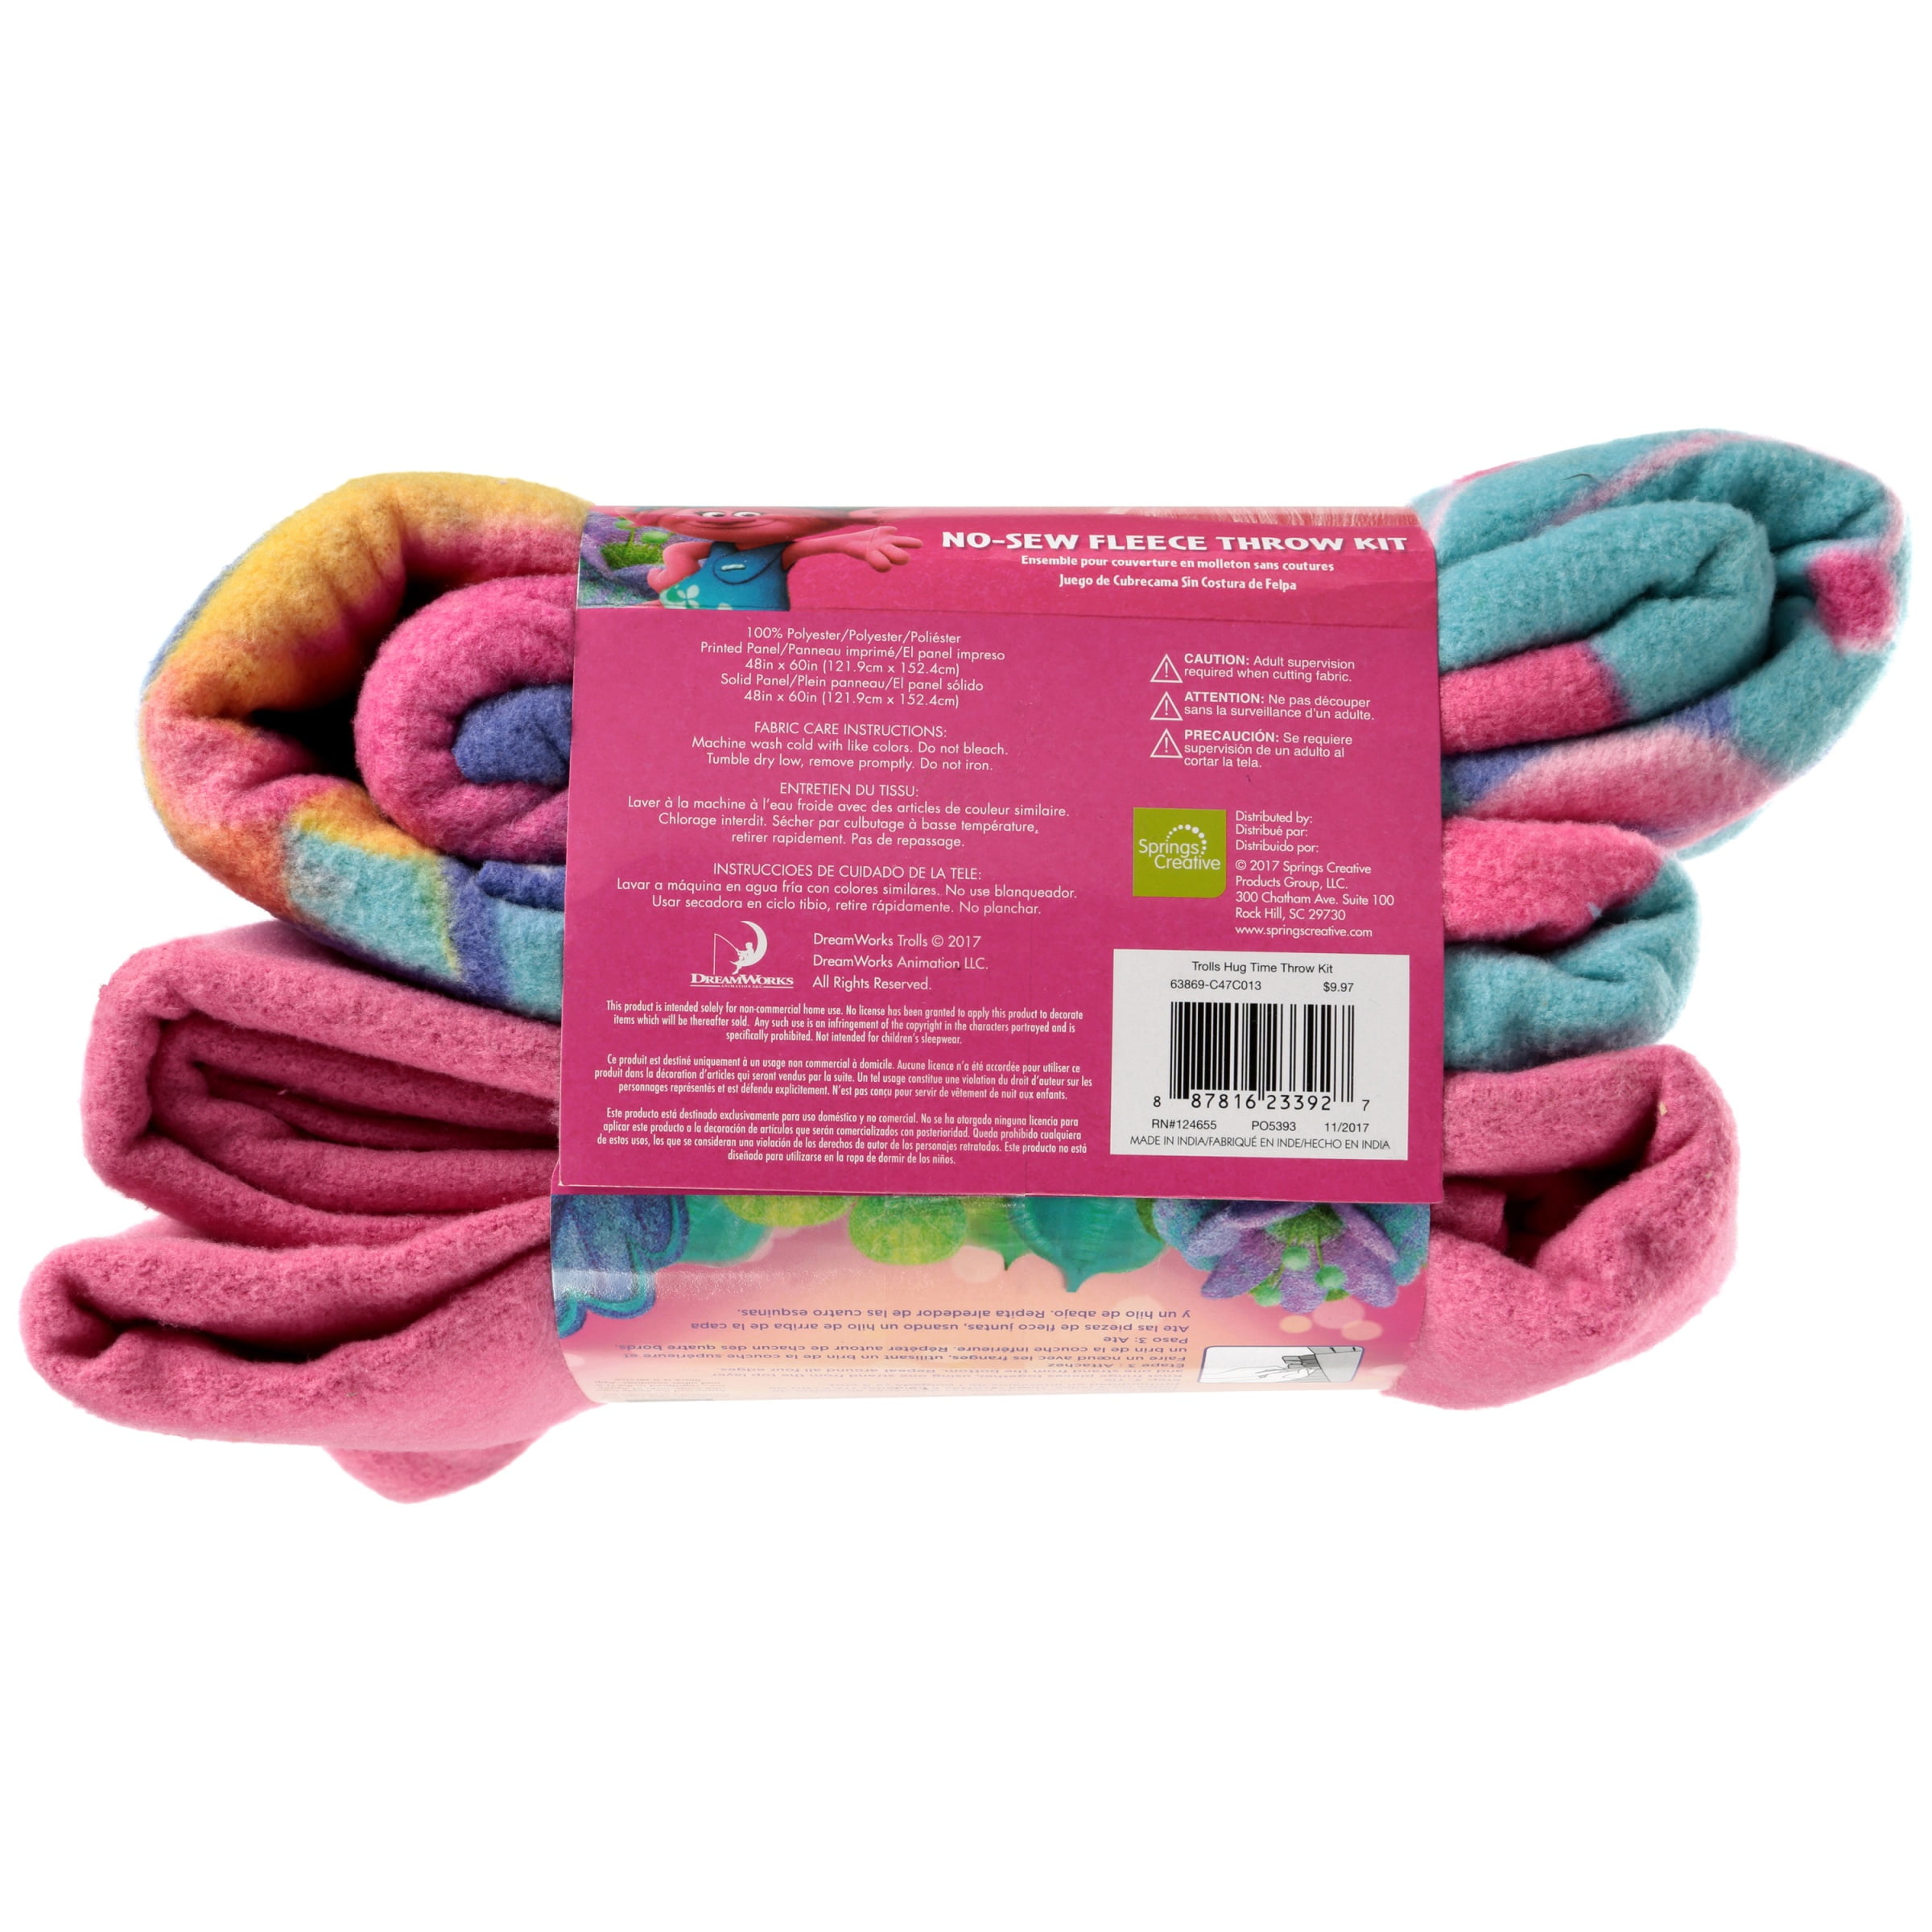 No Sew Anti-pill Fleece Throw Blanket Kit 48 X 60 Inch With Cute Fish  Design With i'm Too CUTE to Catch Inscription 